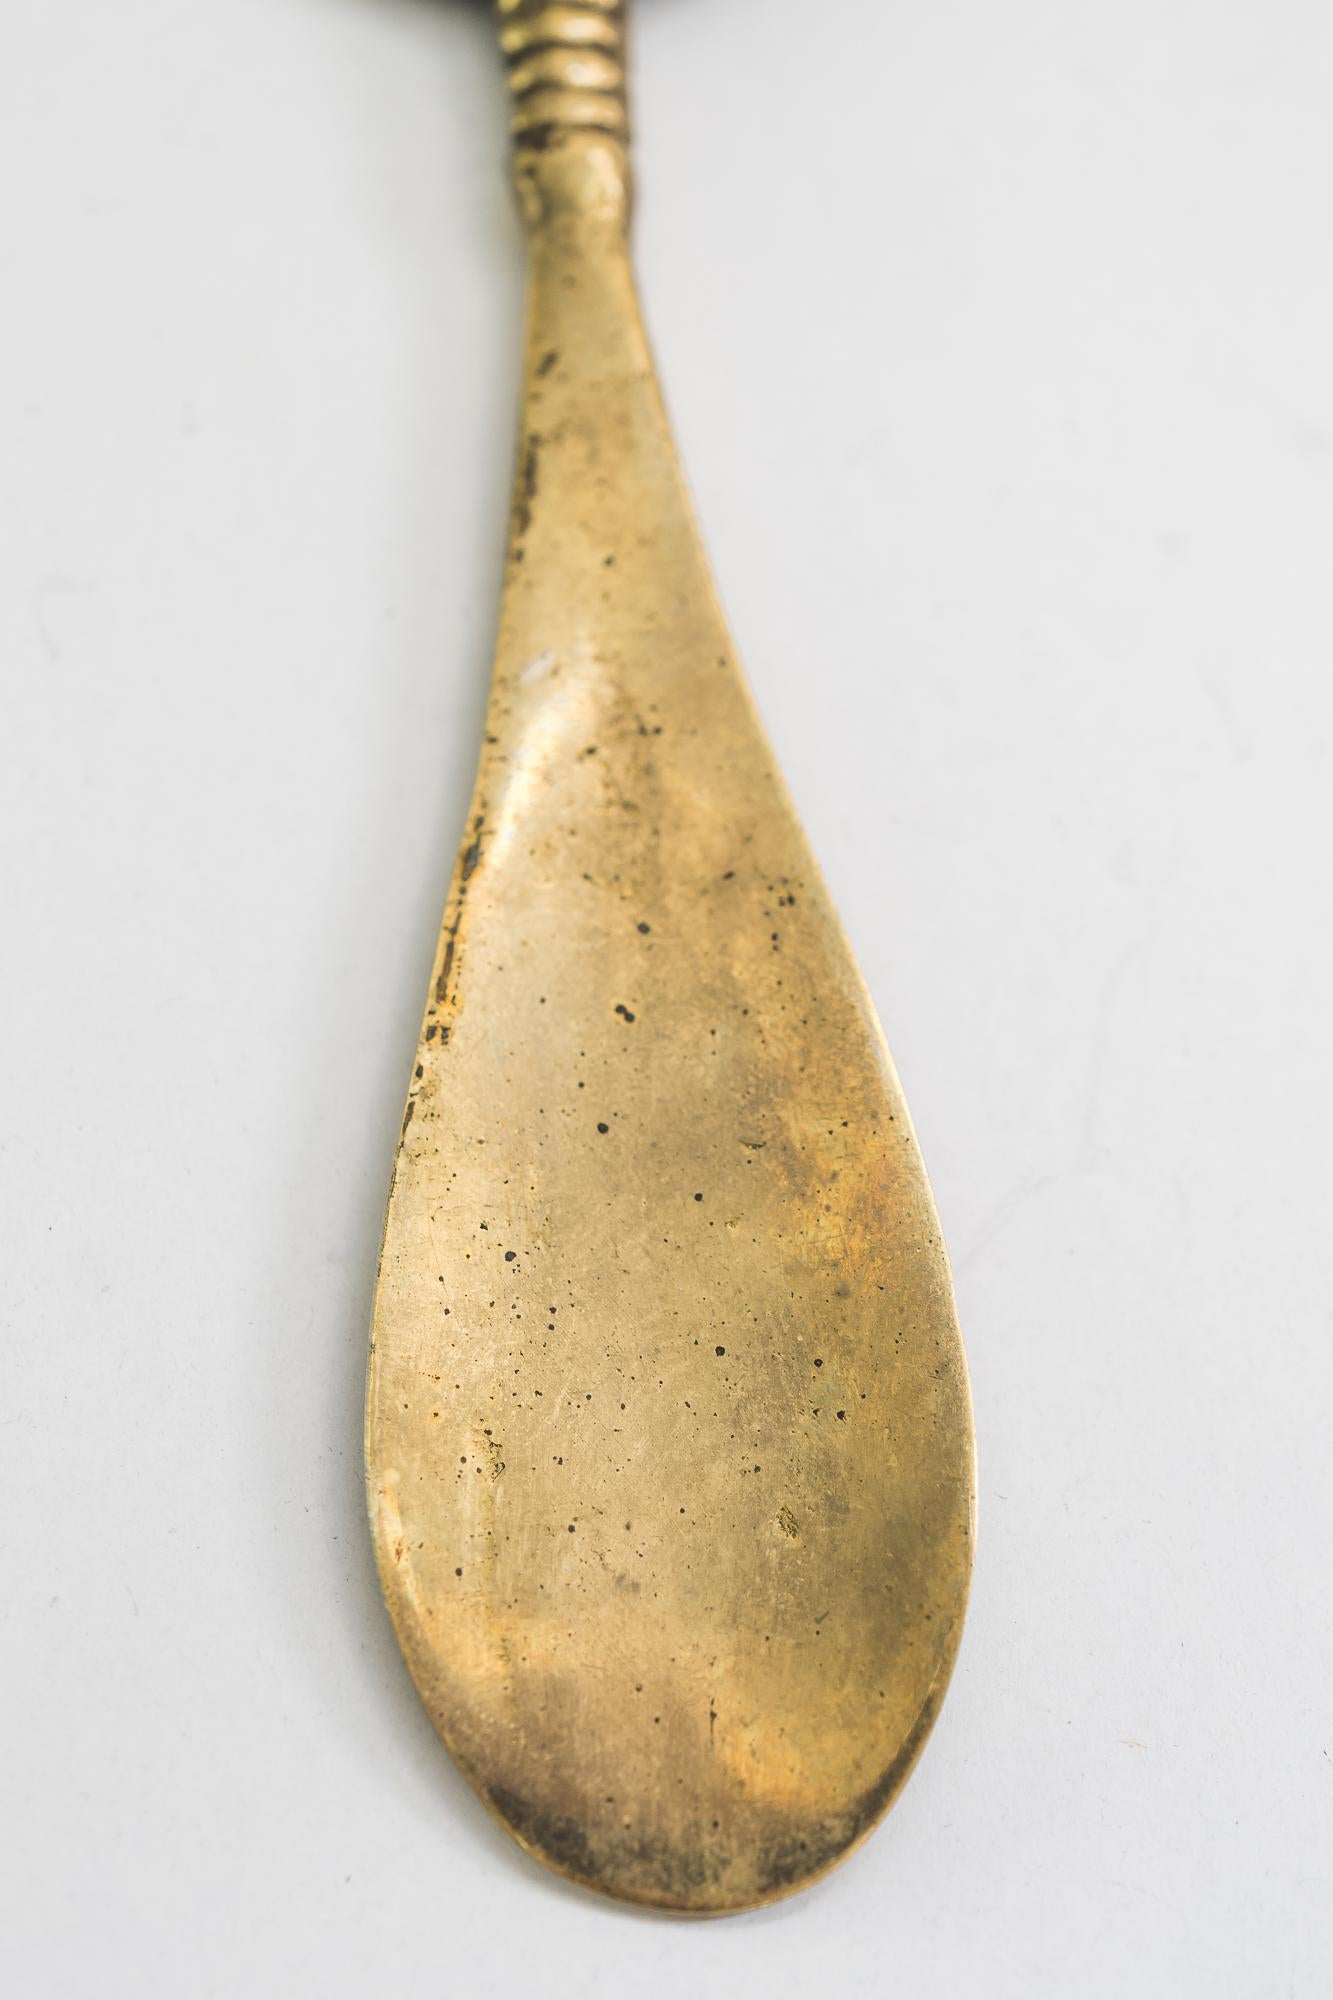 Walter Bosse shoehorn shows a cat, circa 1950s
Original condition.